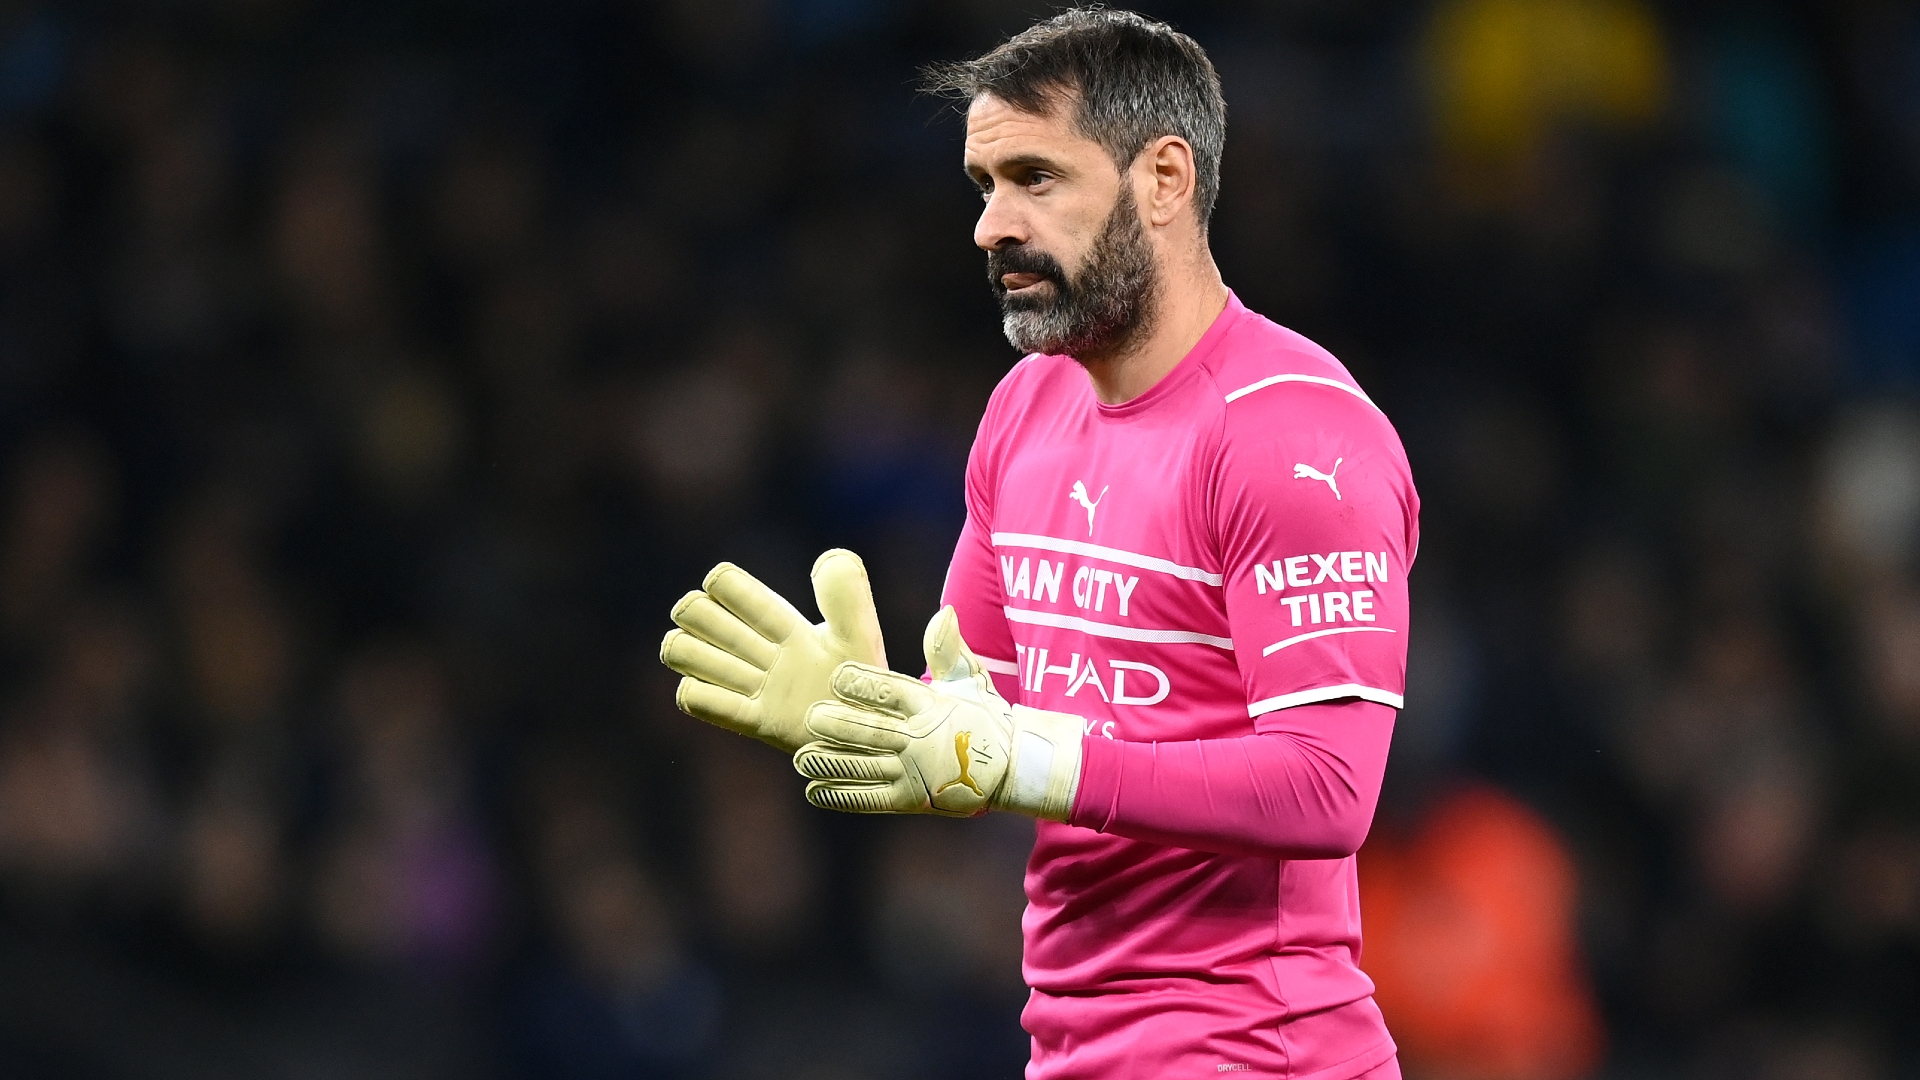 Scott Carson age, salary, net worth, girlfriend, Career and much more